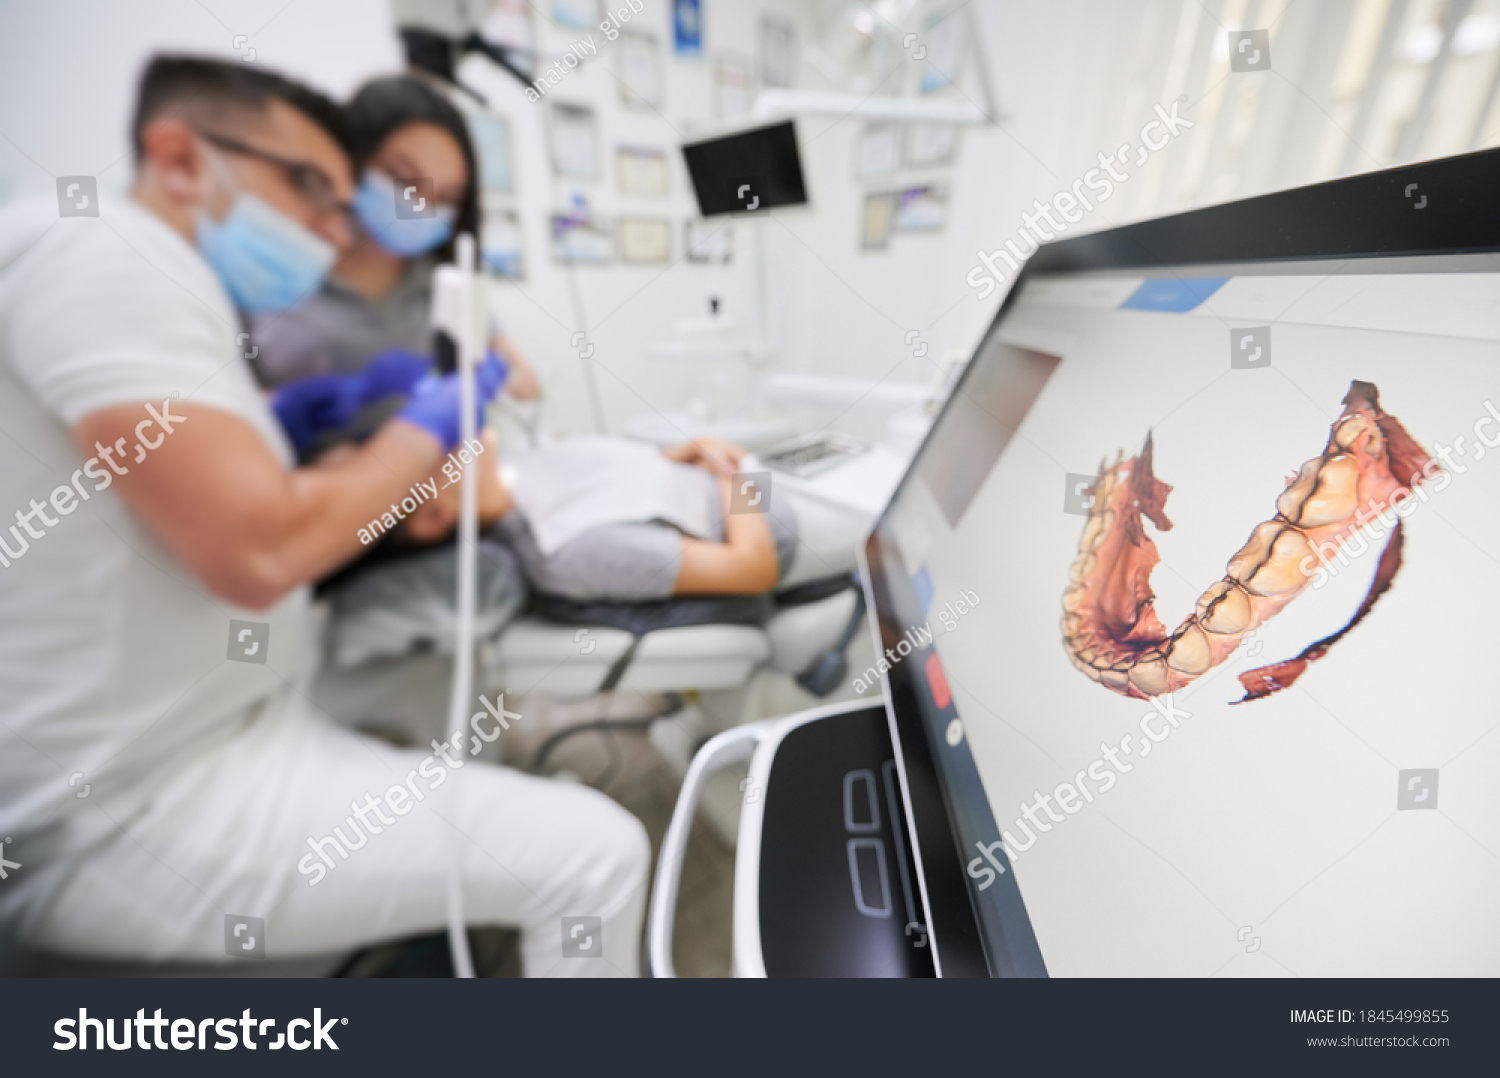 Dentist scanning patient's teeth with modern scanning machine. Digital print of patient's teeth is on big screen. Modern high precision technologies. Concept of modern dentistry #1845499855